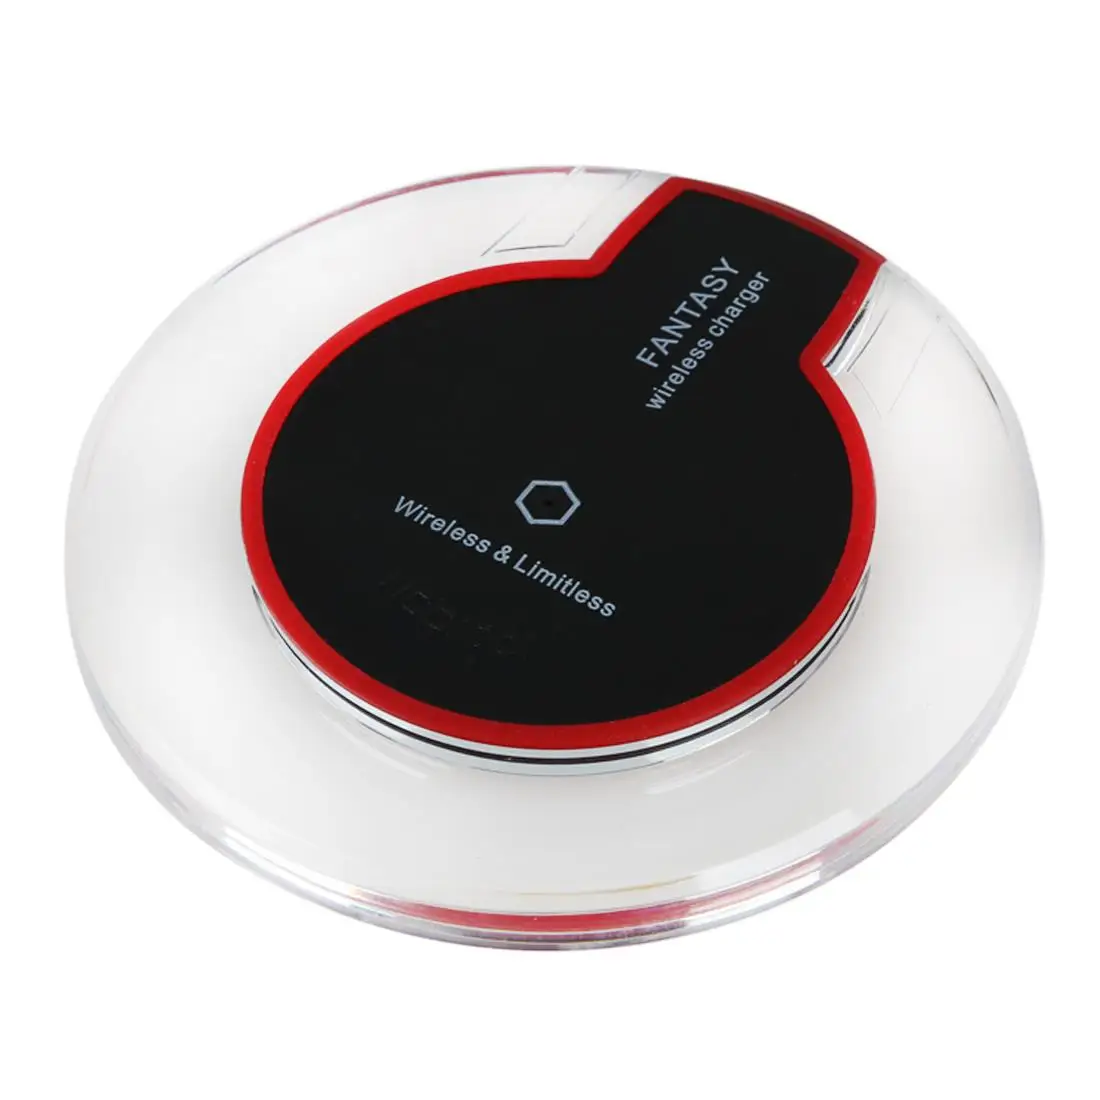 

Cordless Charging Pad Round Charger for Mobile Phones Iq Smartphone